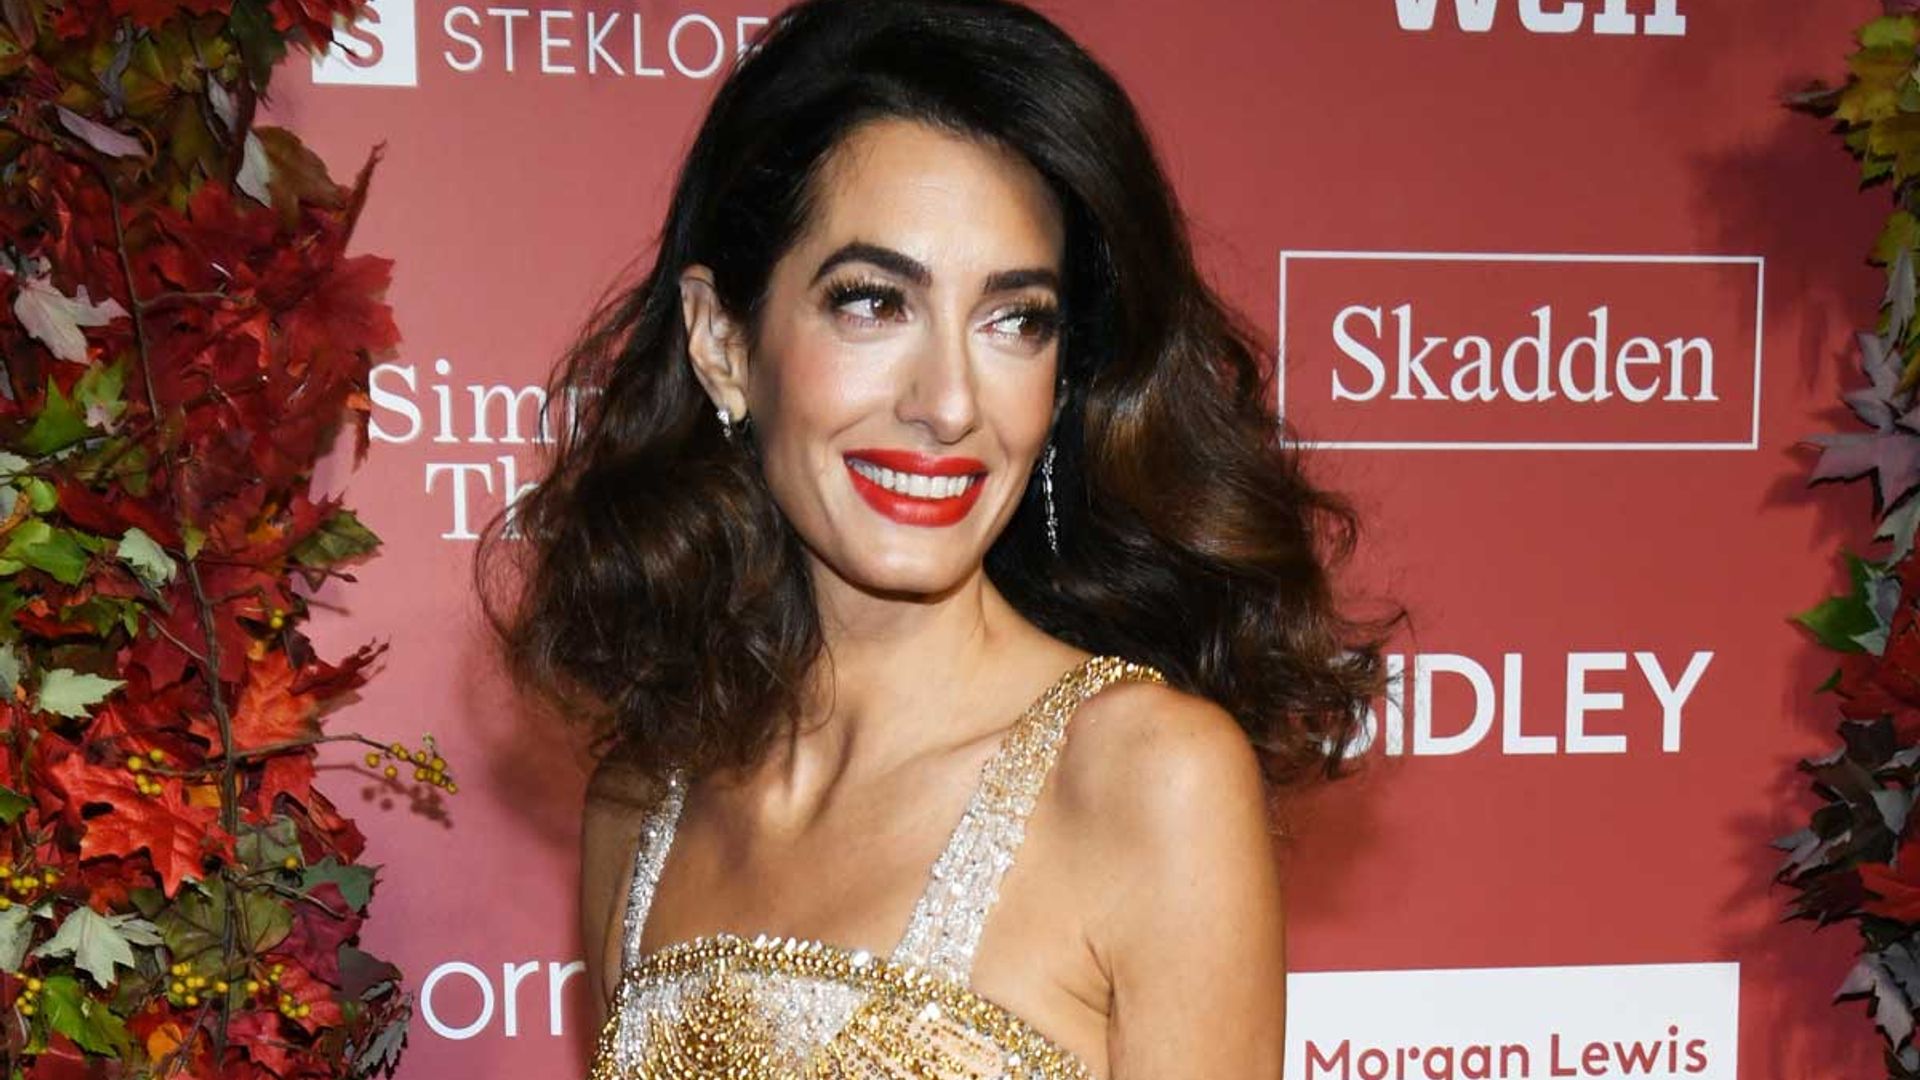 Amal Clooney dazzles in gold dress – and George can't take his